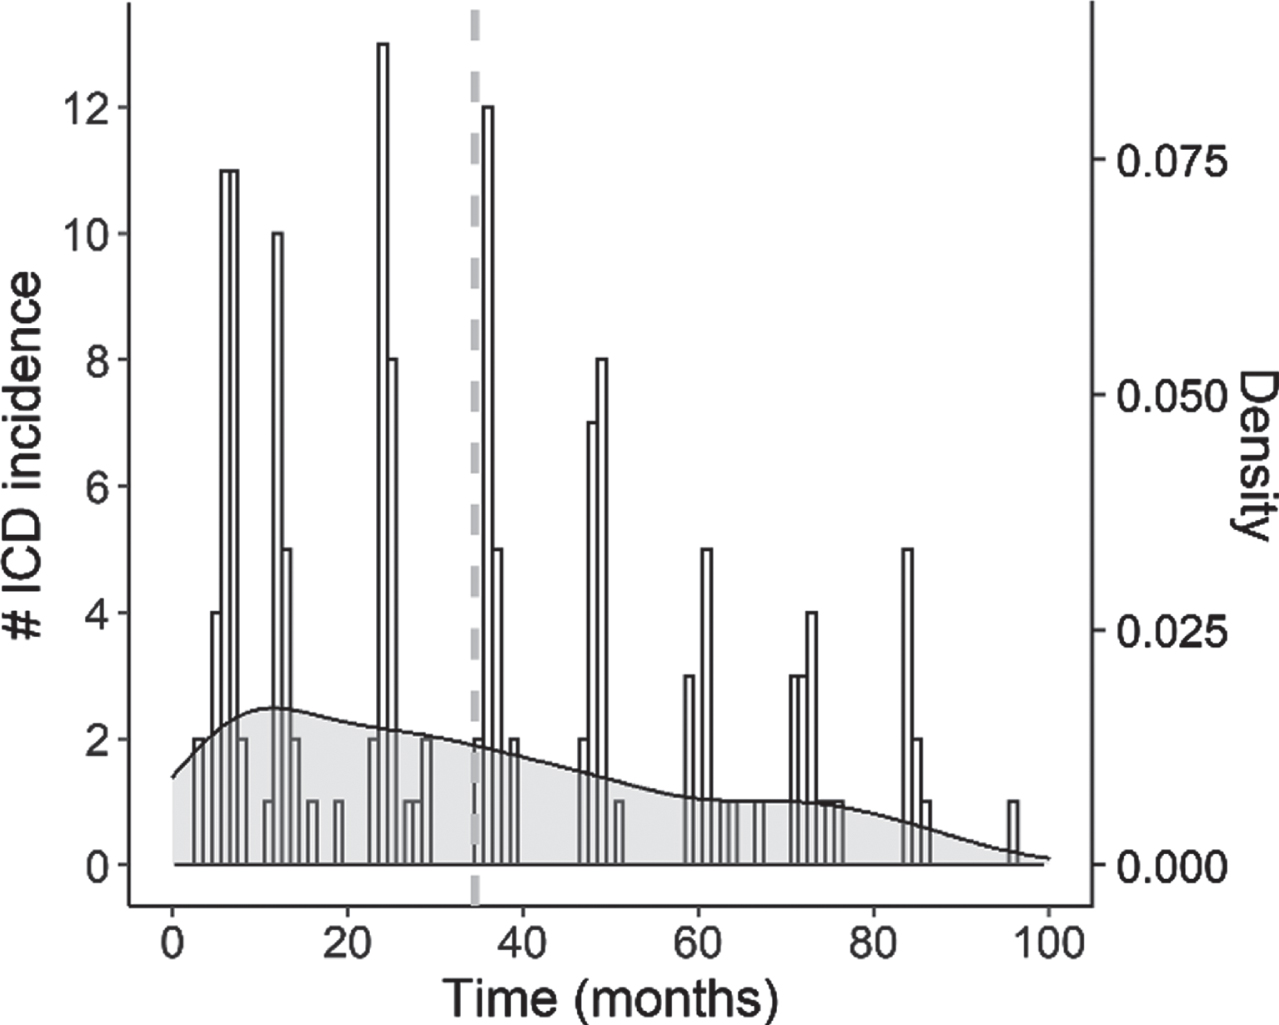 Histogram with overlaid density plot showing the distribution of ICD onset times across patients in the study. The vertical dashed line indicates the average onset time (M = 34.54).